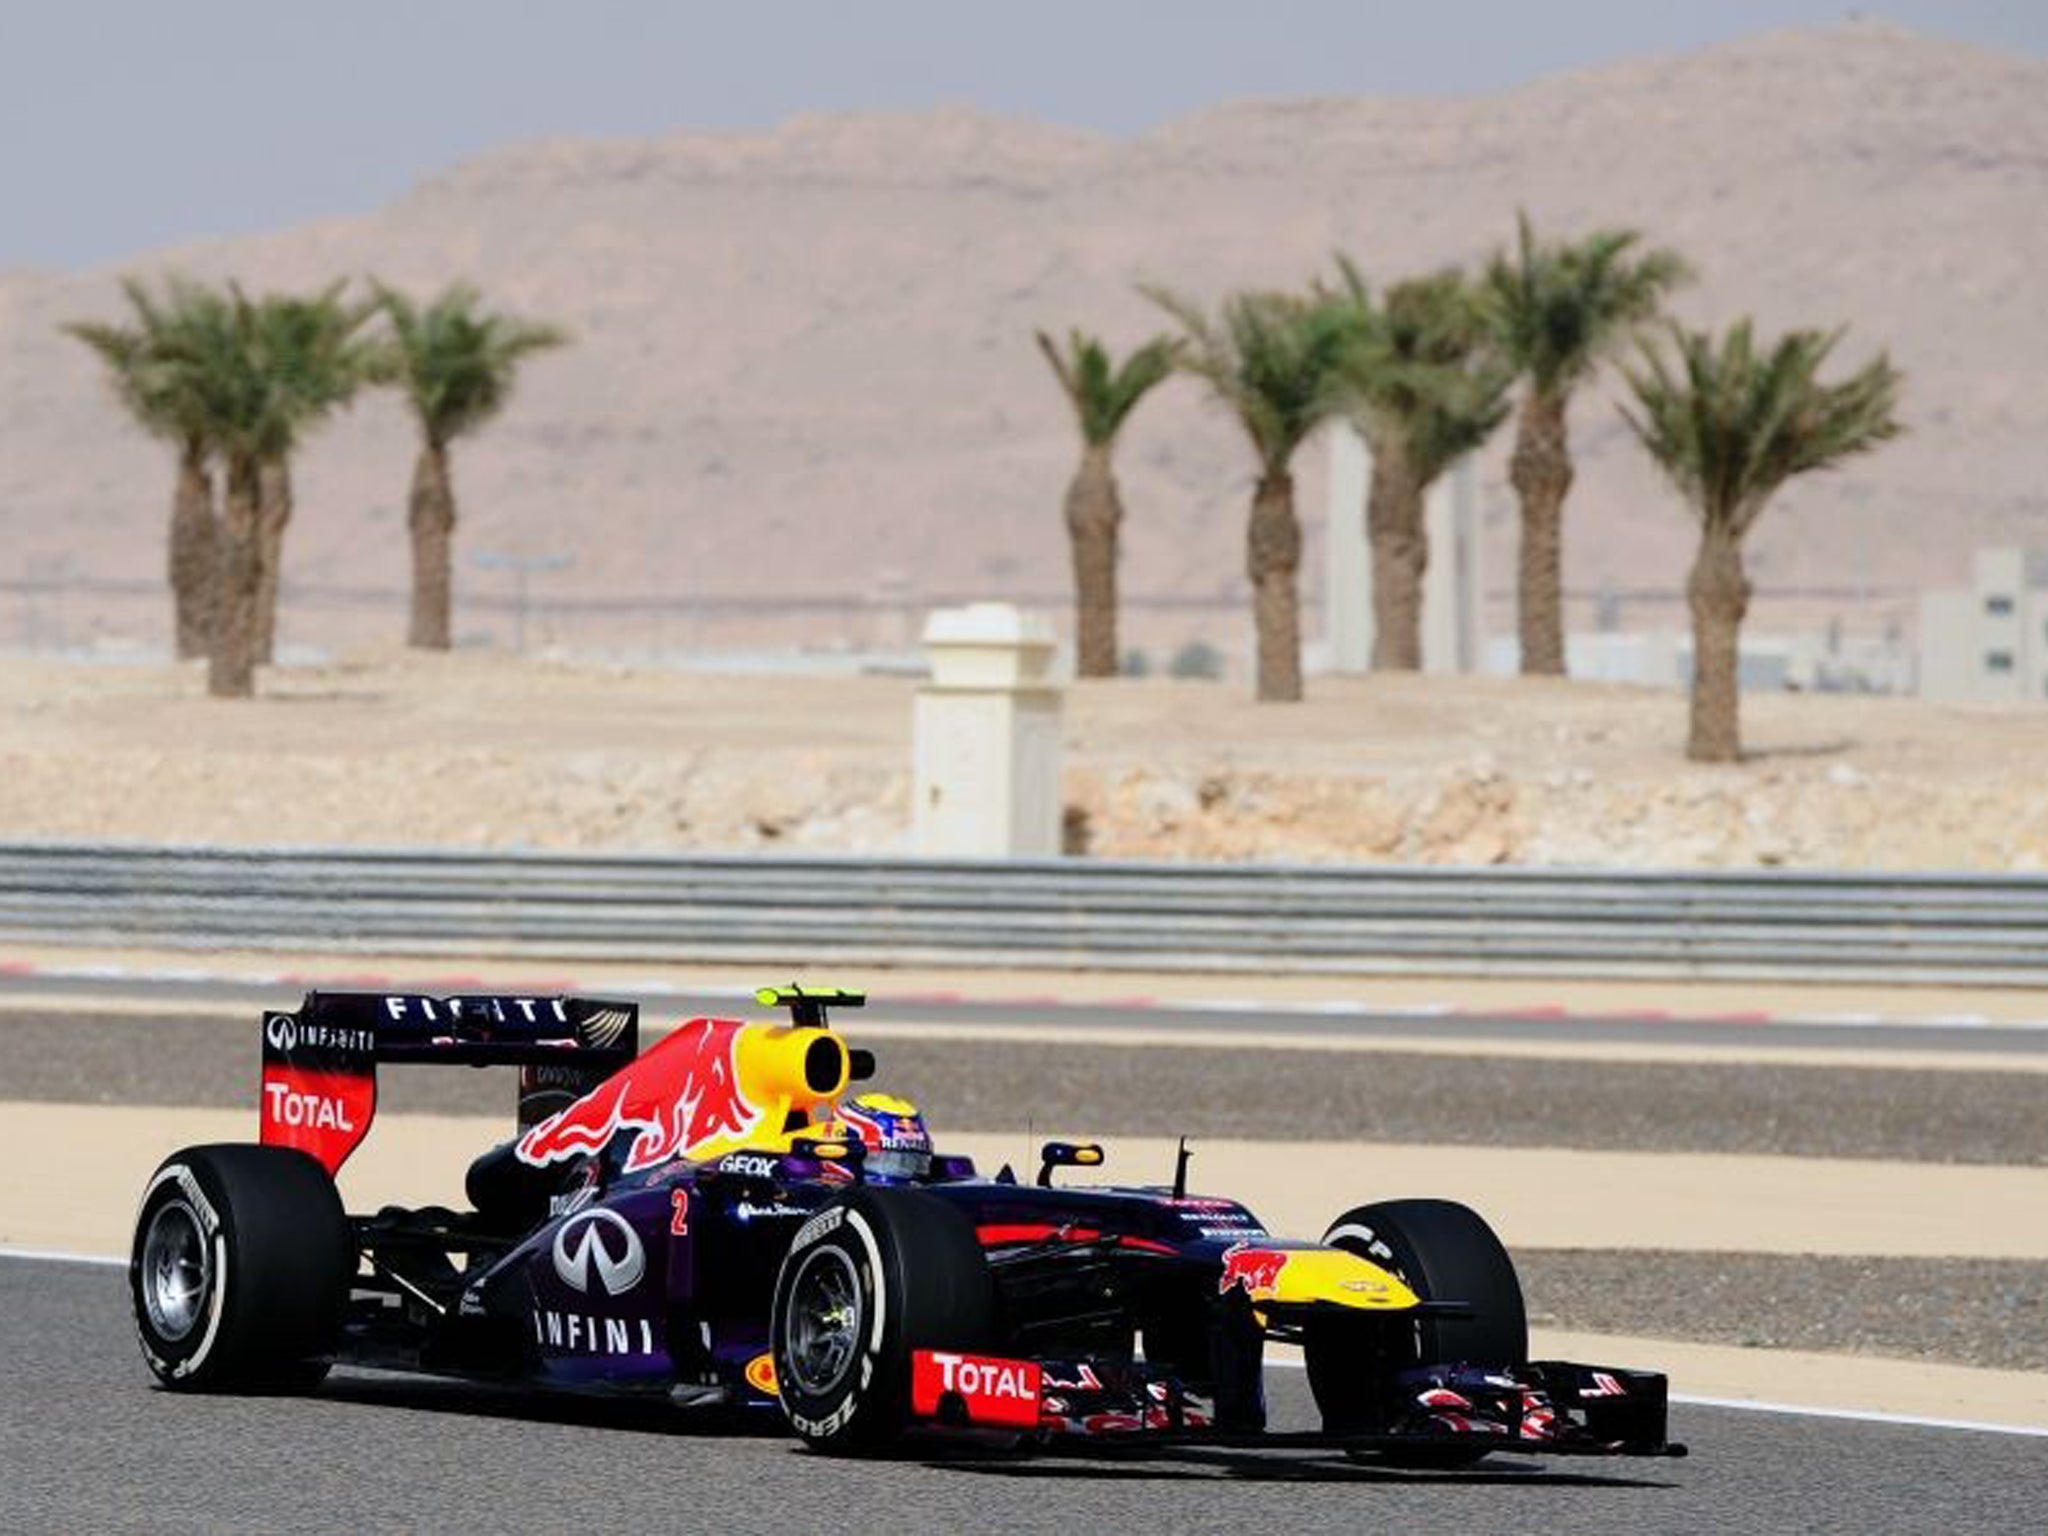 Red Bull Racing's Australian driver Mark Webber during the second practice session at the Bahrain International Circuit in Manama